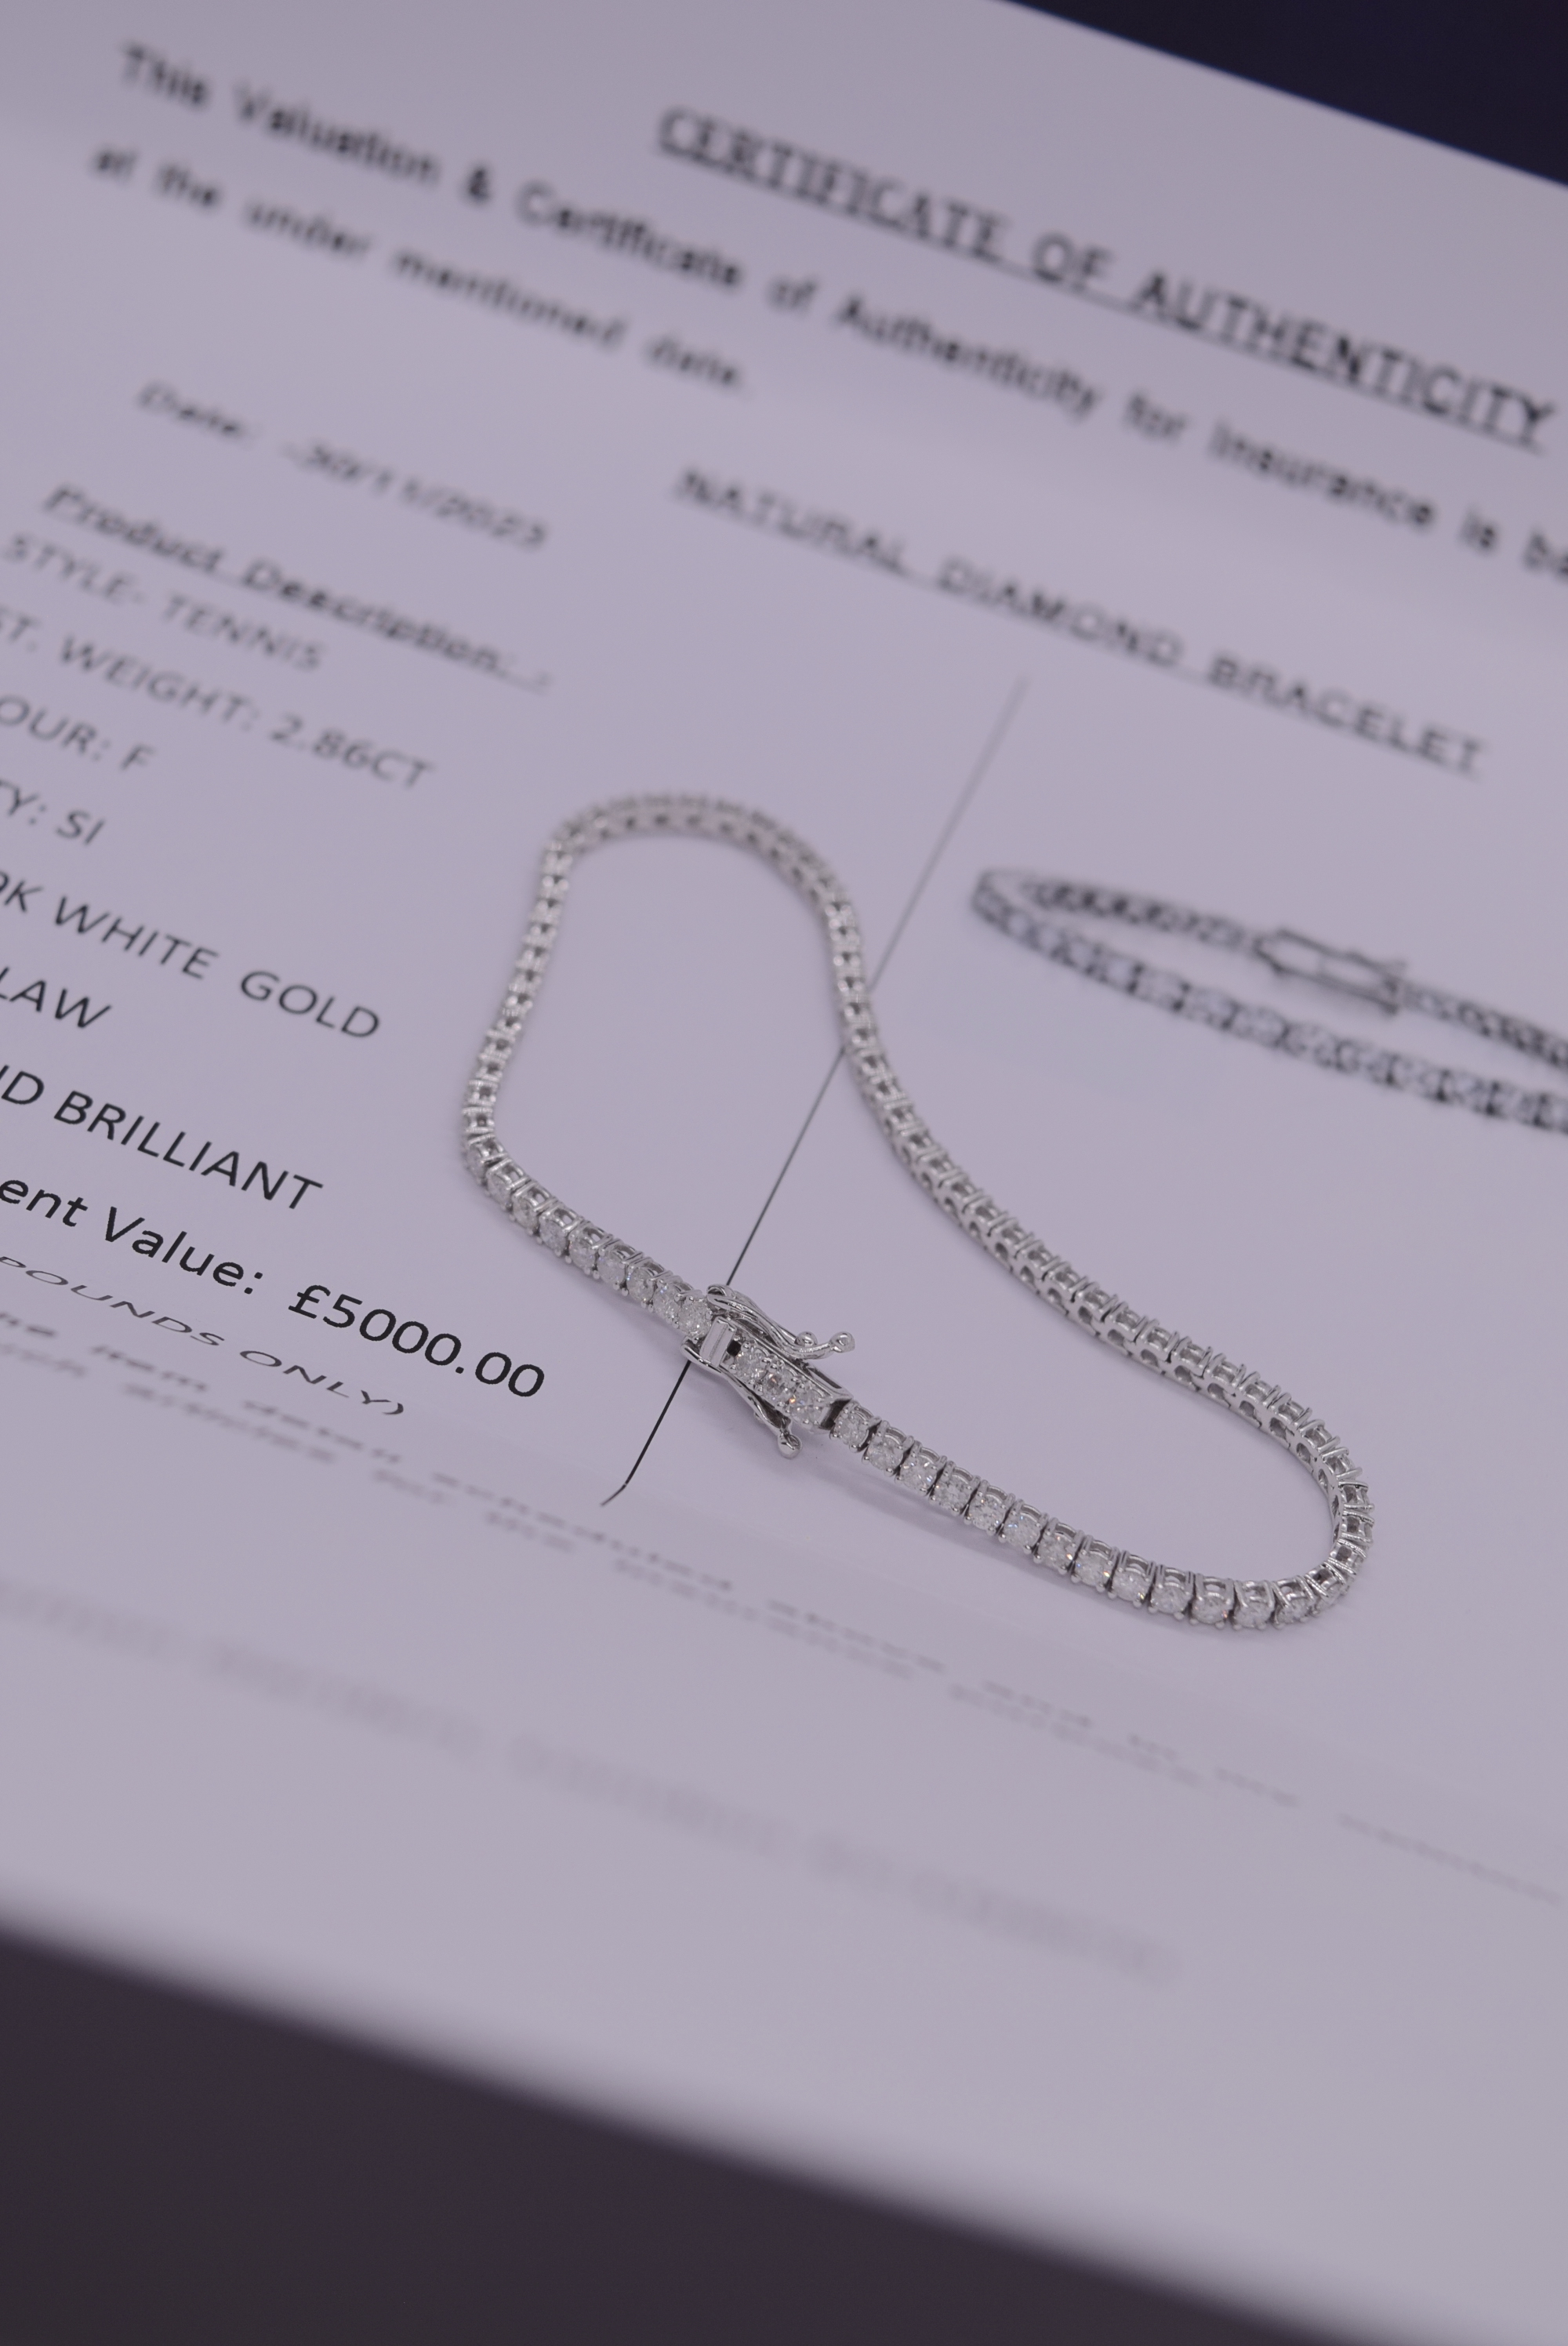 2.86CT DIAMOND TENNIS BRACELET IN WHITE GOLD (SI CLARITY/ F COLOUR) £5,000.00 VALUATION CERTIFICATE - Image 5 of 6